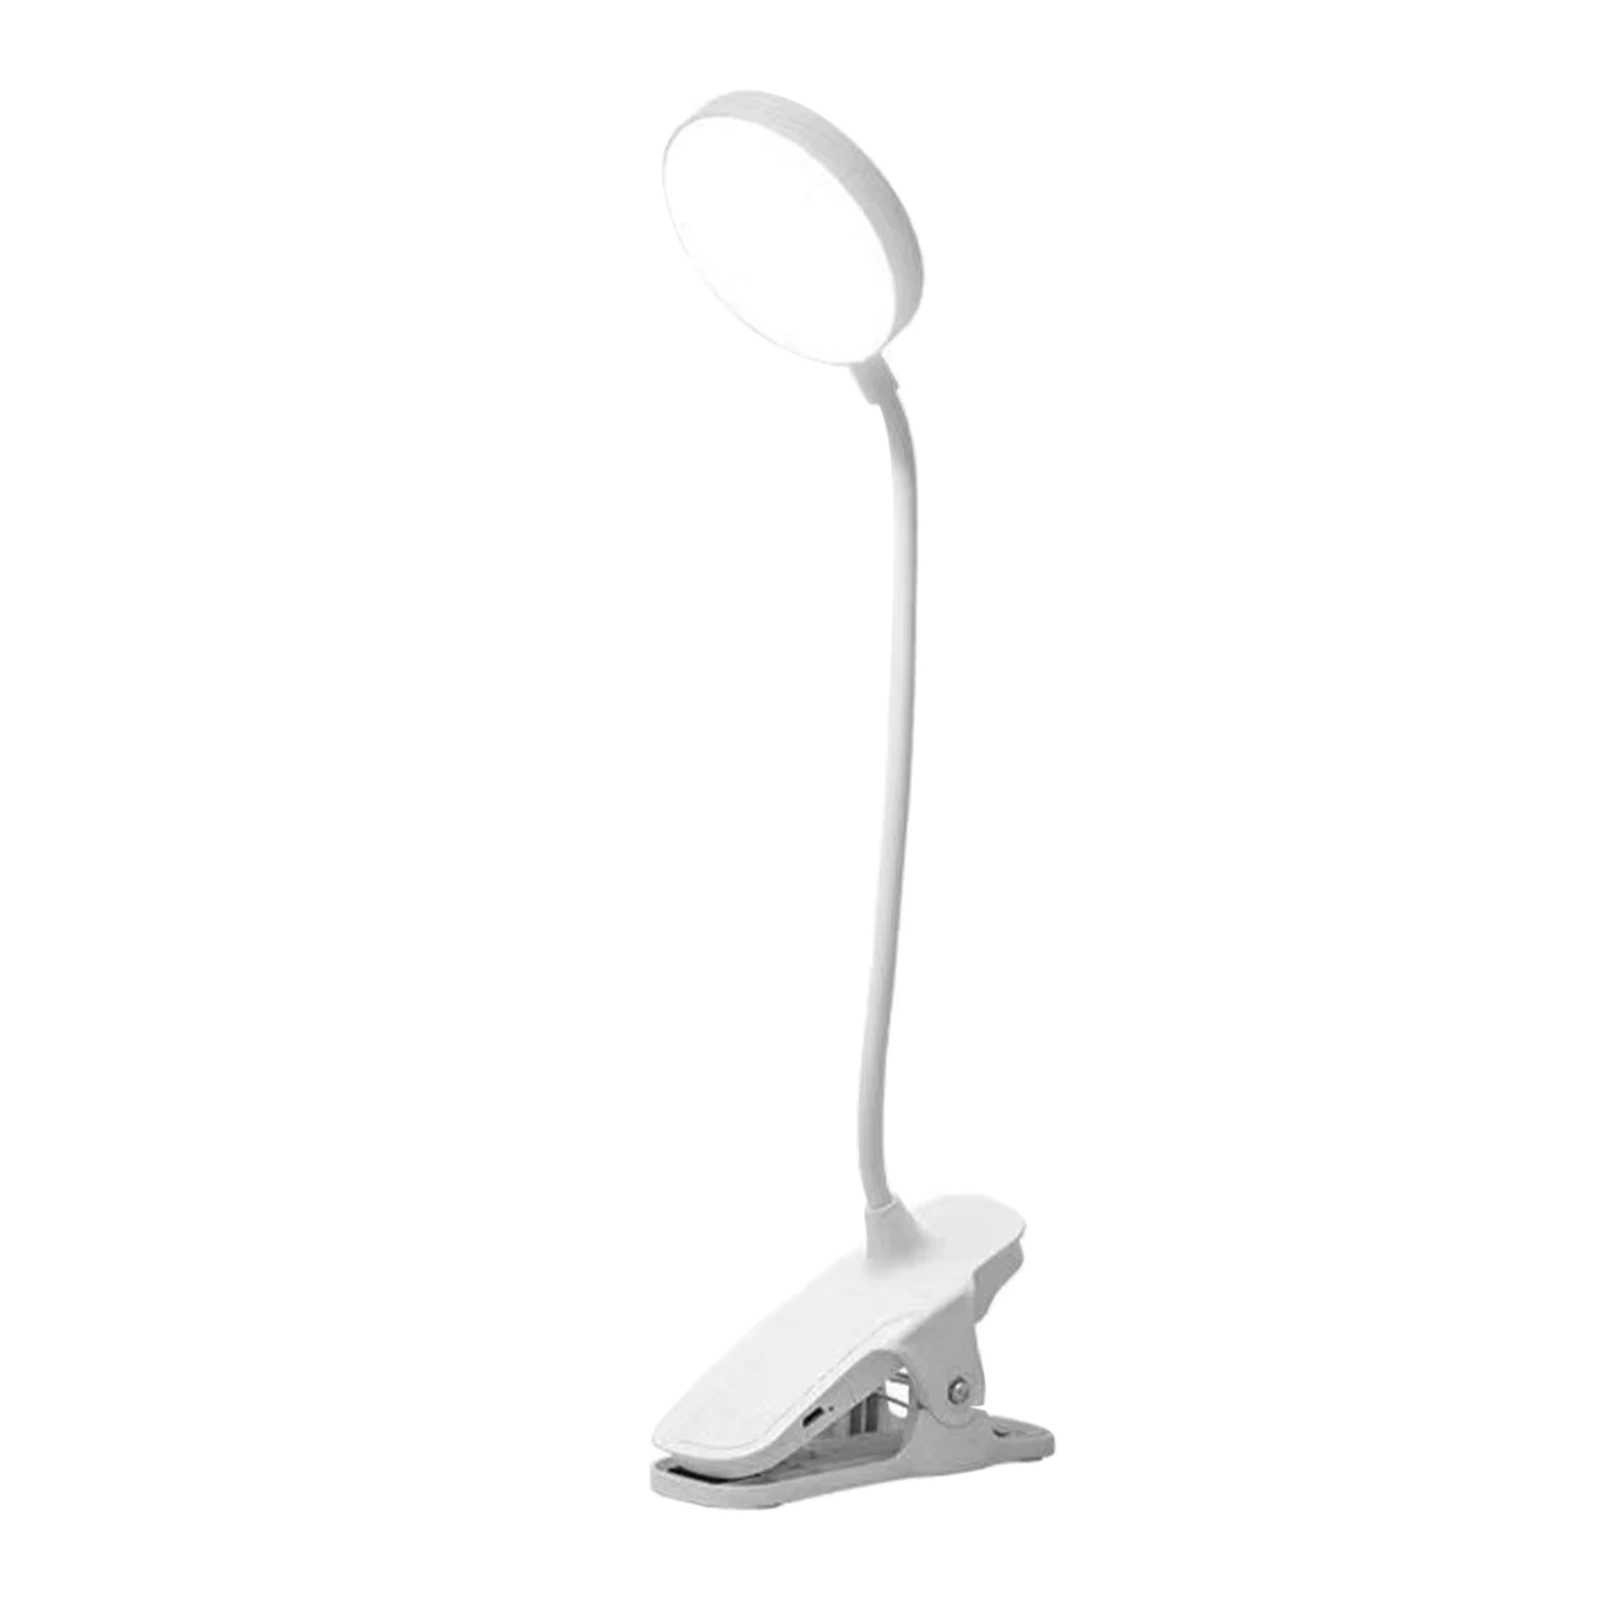 

Flexible Gooseneck Bedside Study Dormitory Dimming Clip On LED Desk Lamp Reading 2 Lighting Modes Bedroom Touch Control Student